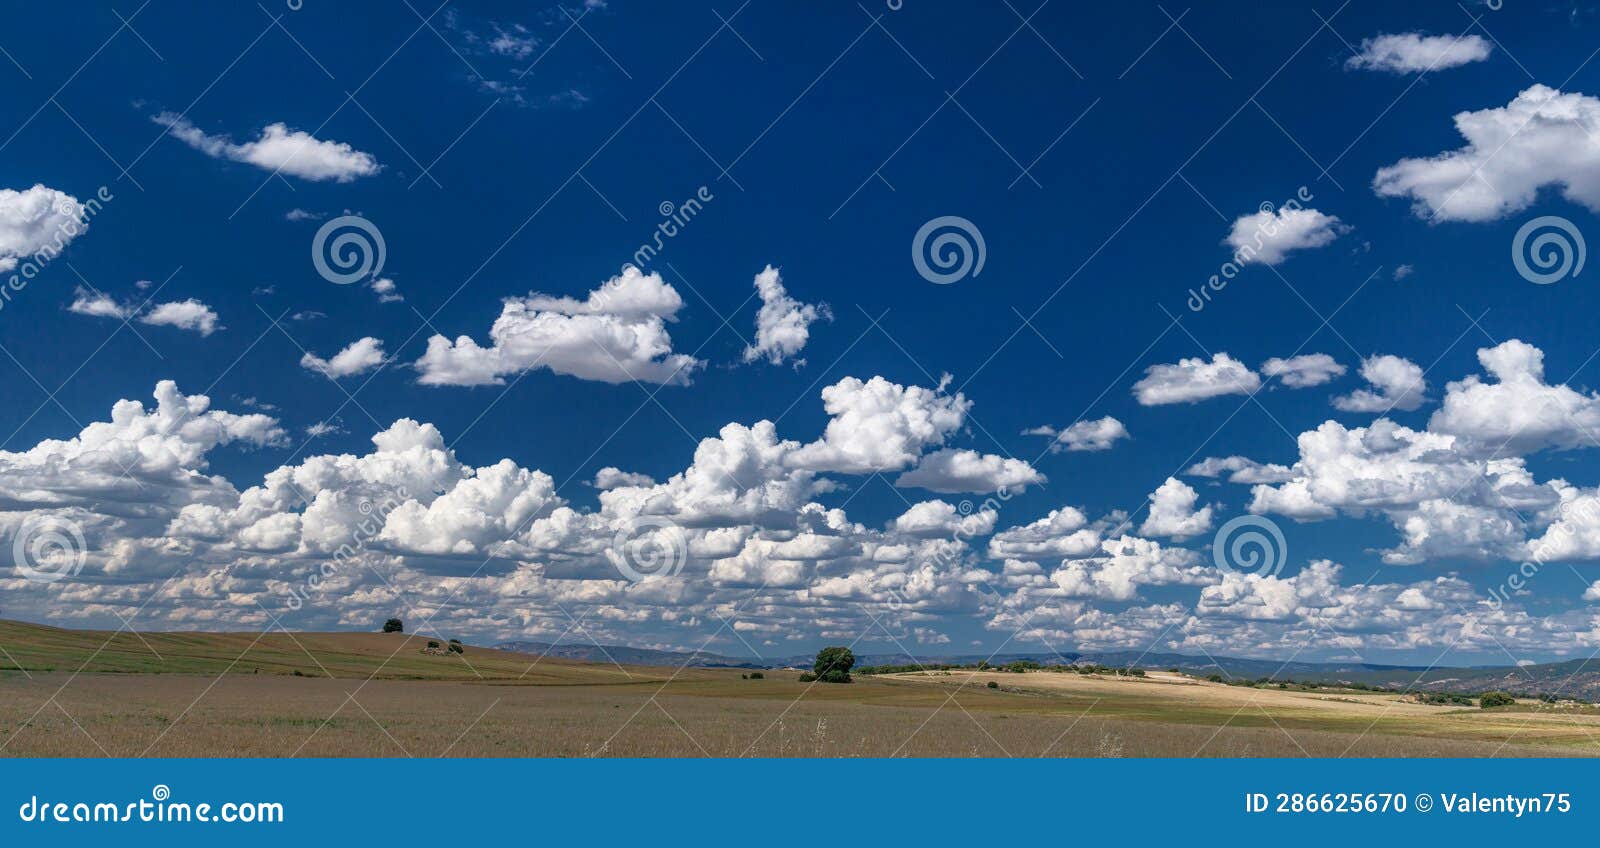 rural landscape of fields, hills and stunning skyscape with cumulus clouds